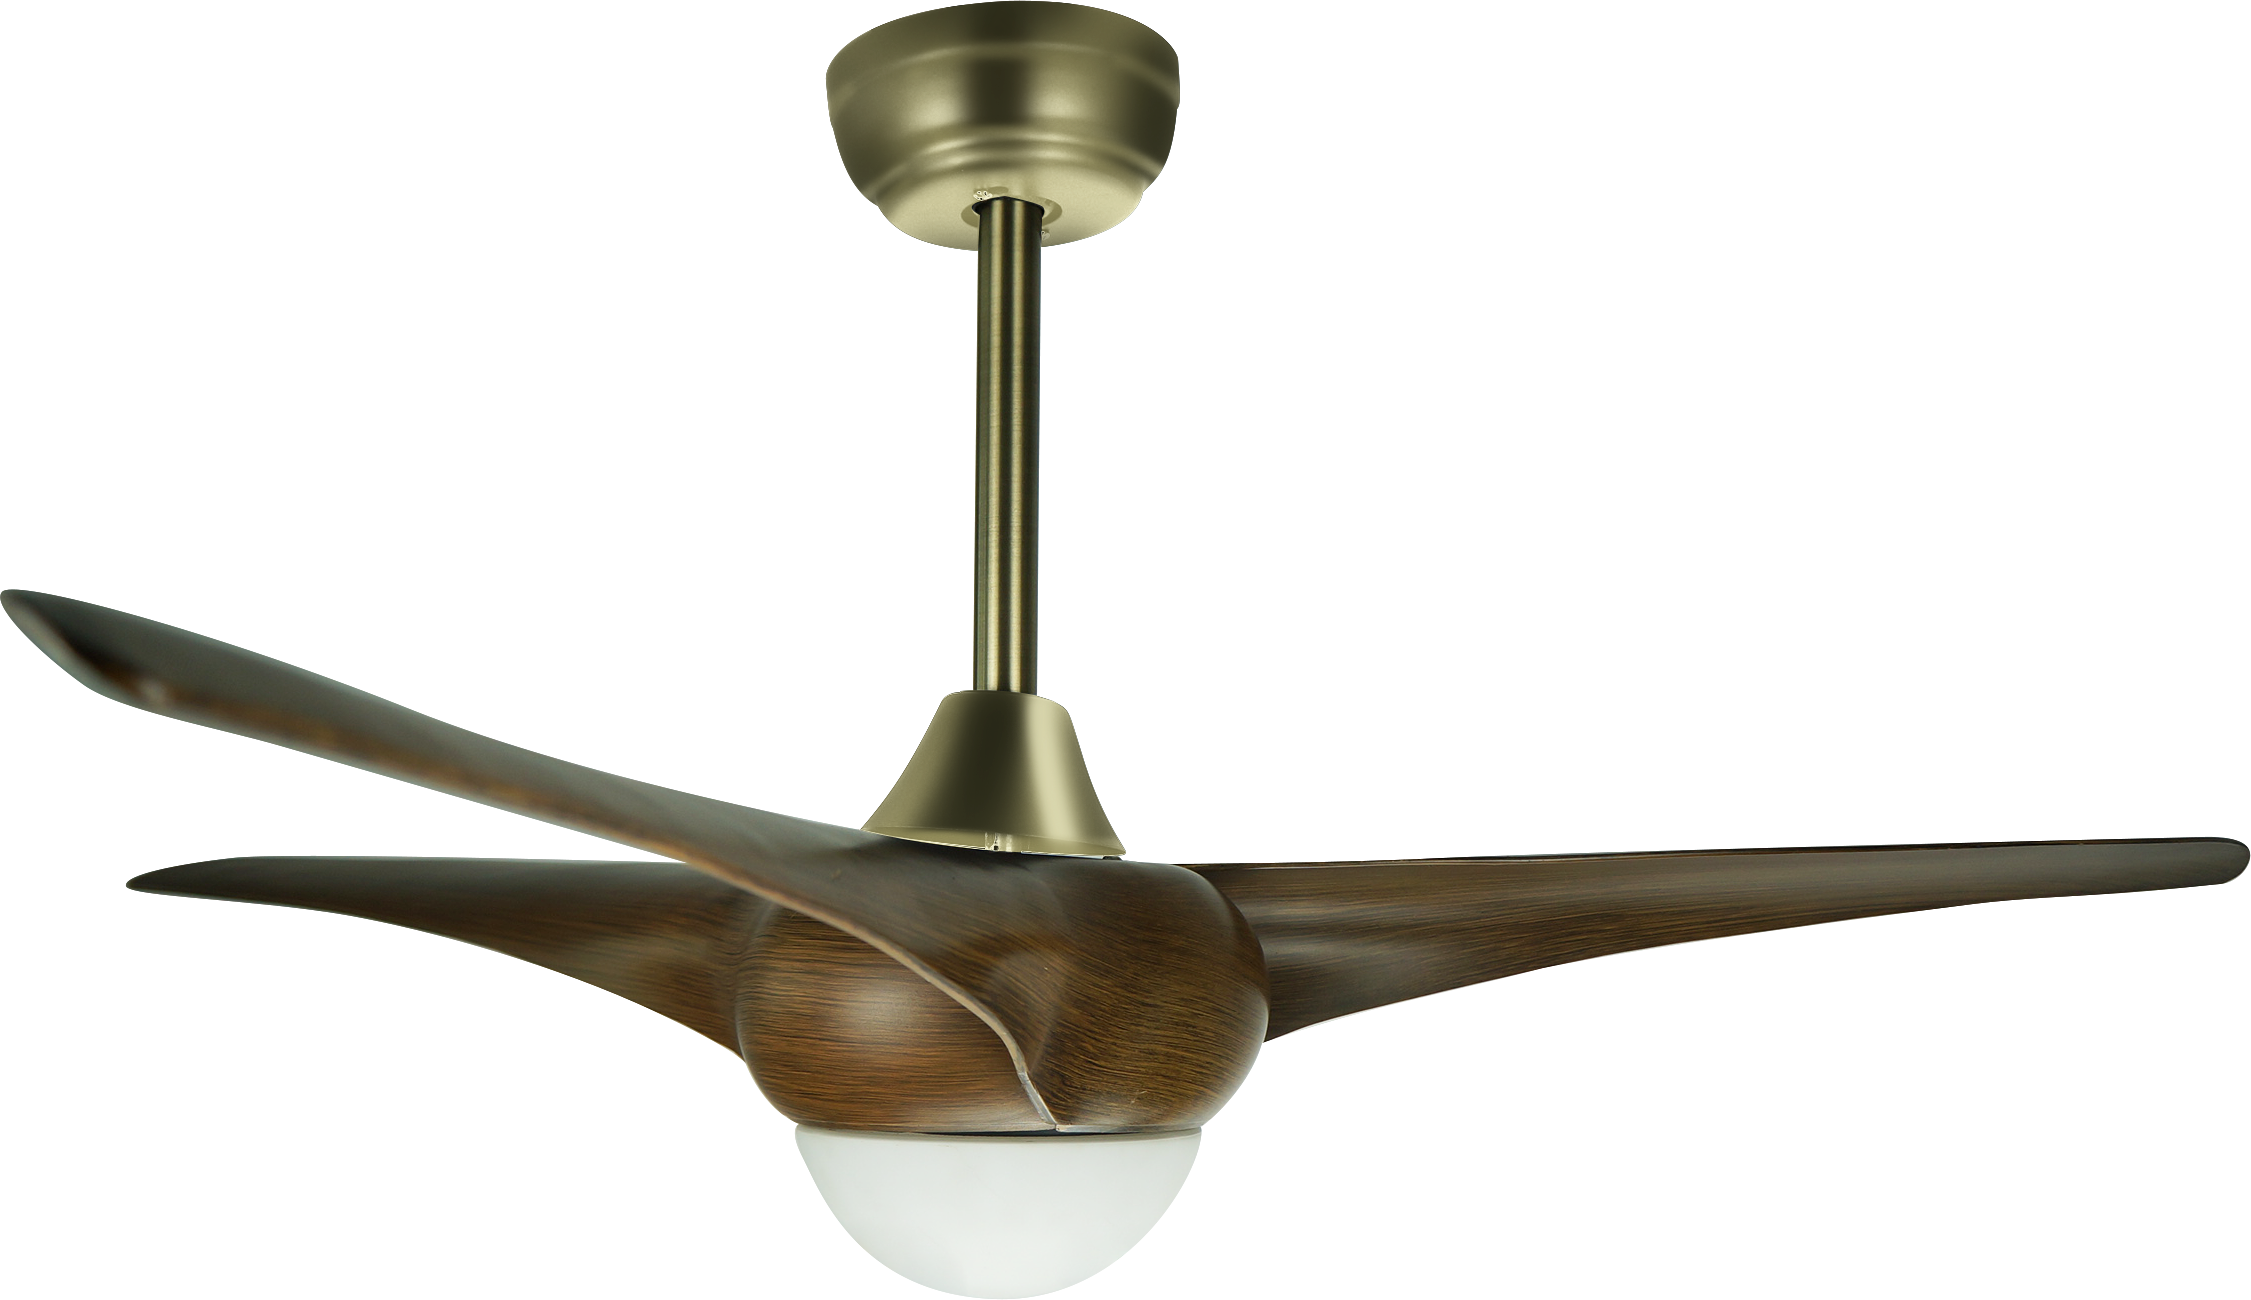 Wooden Ceiling Fan Lamp with Remote Control Foe Sale